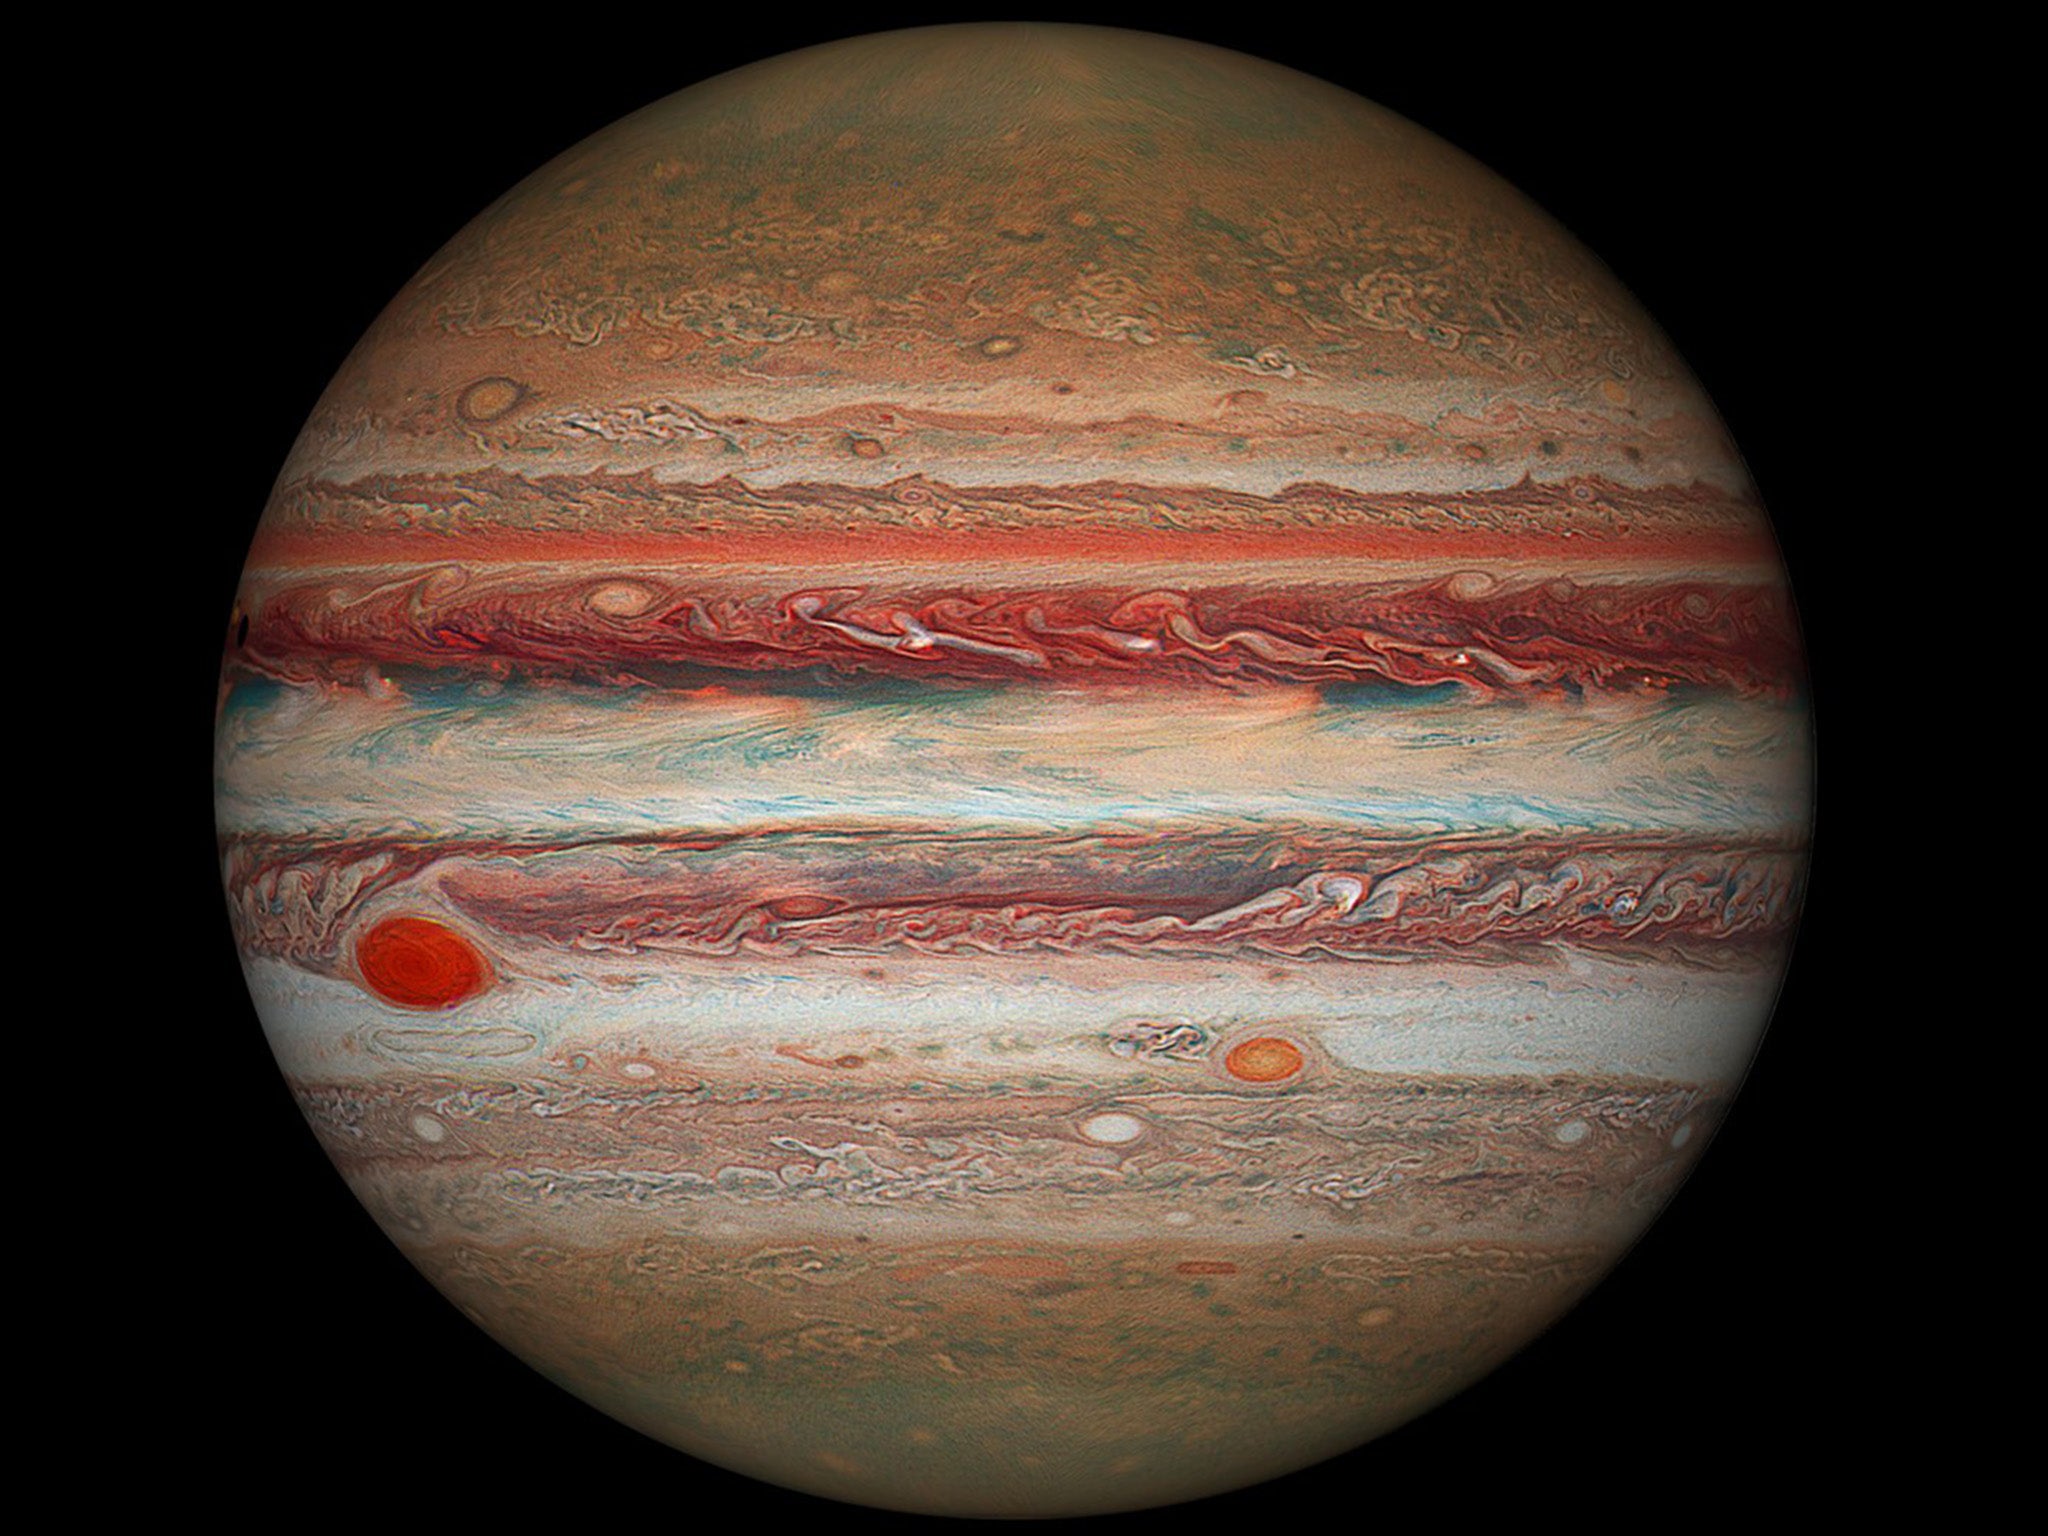 what is the great red spot on the planet jupiter and when was the great red spot on jupiter first discovered